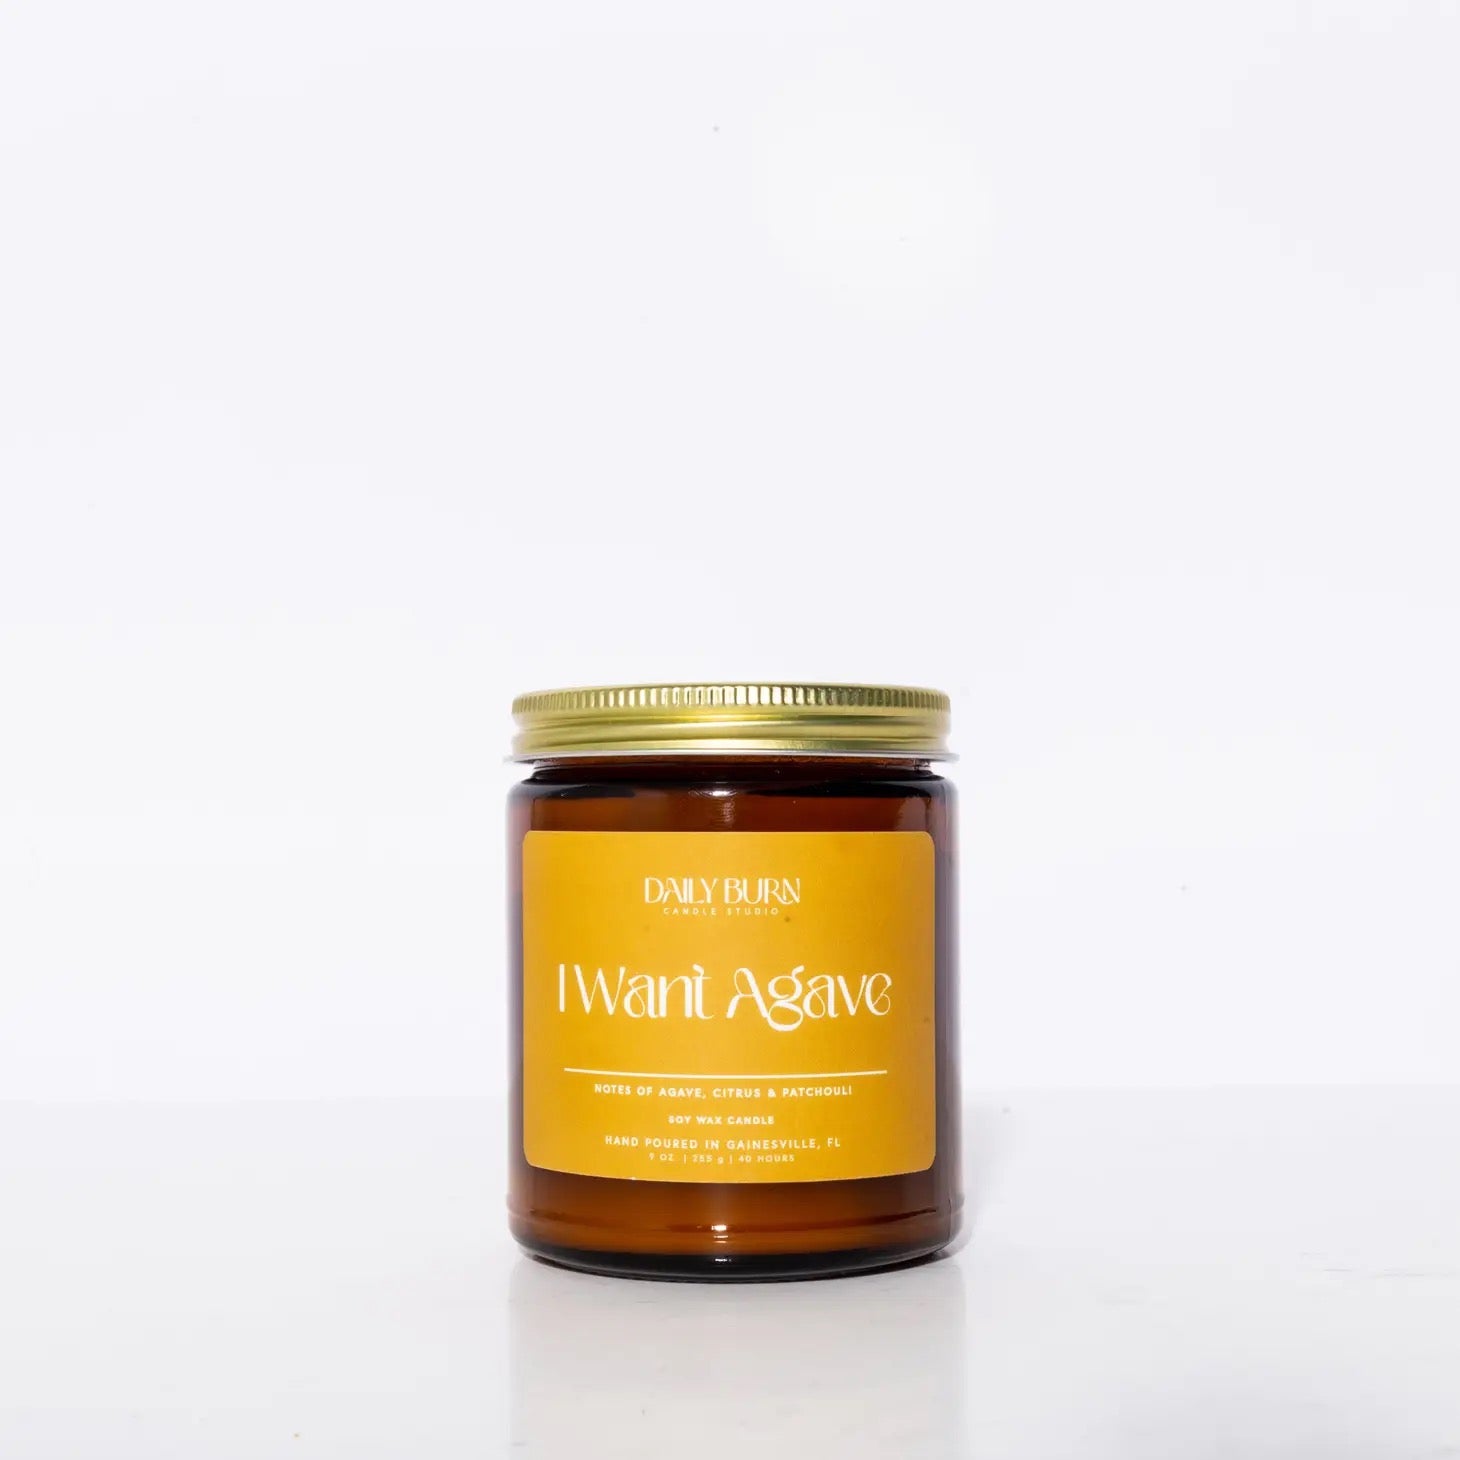 Daily Burn Candle Studio - 9 oz I Want Agave Candle